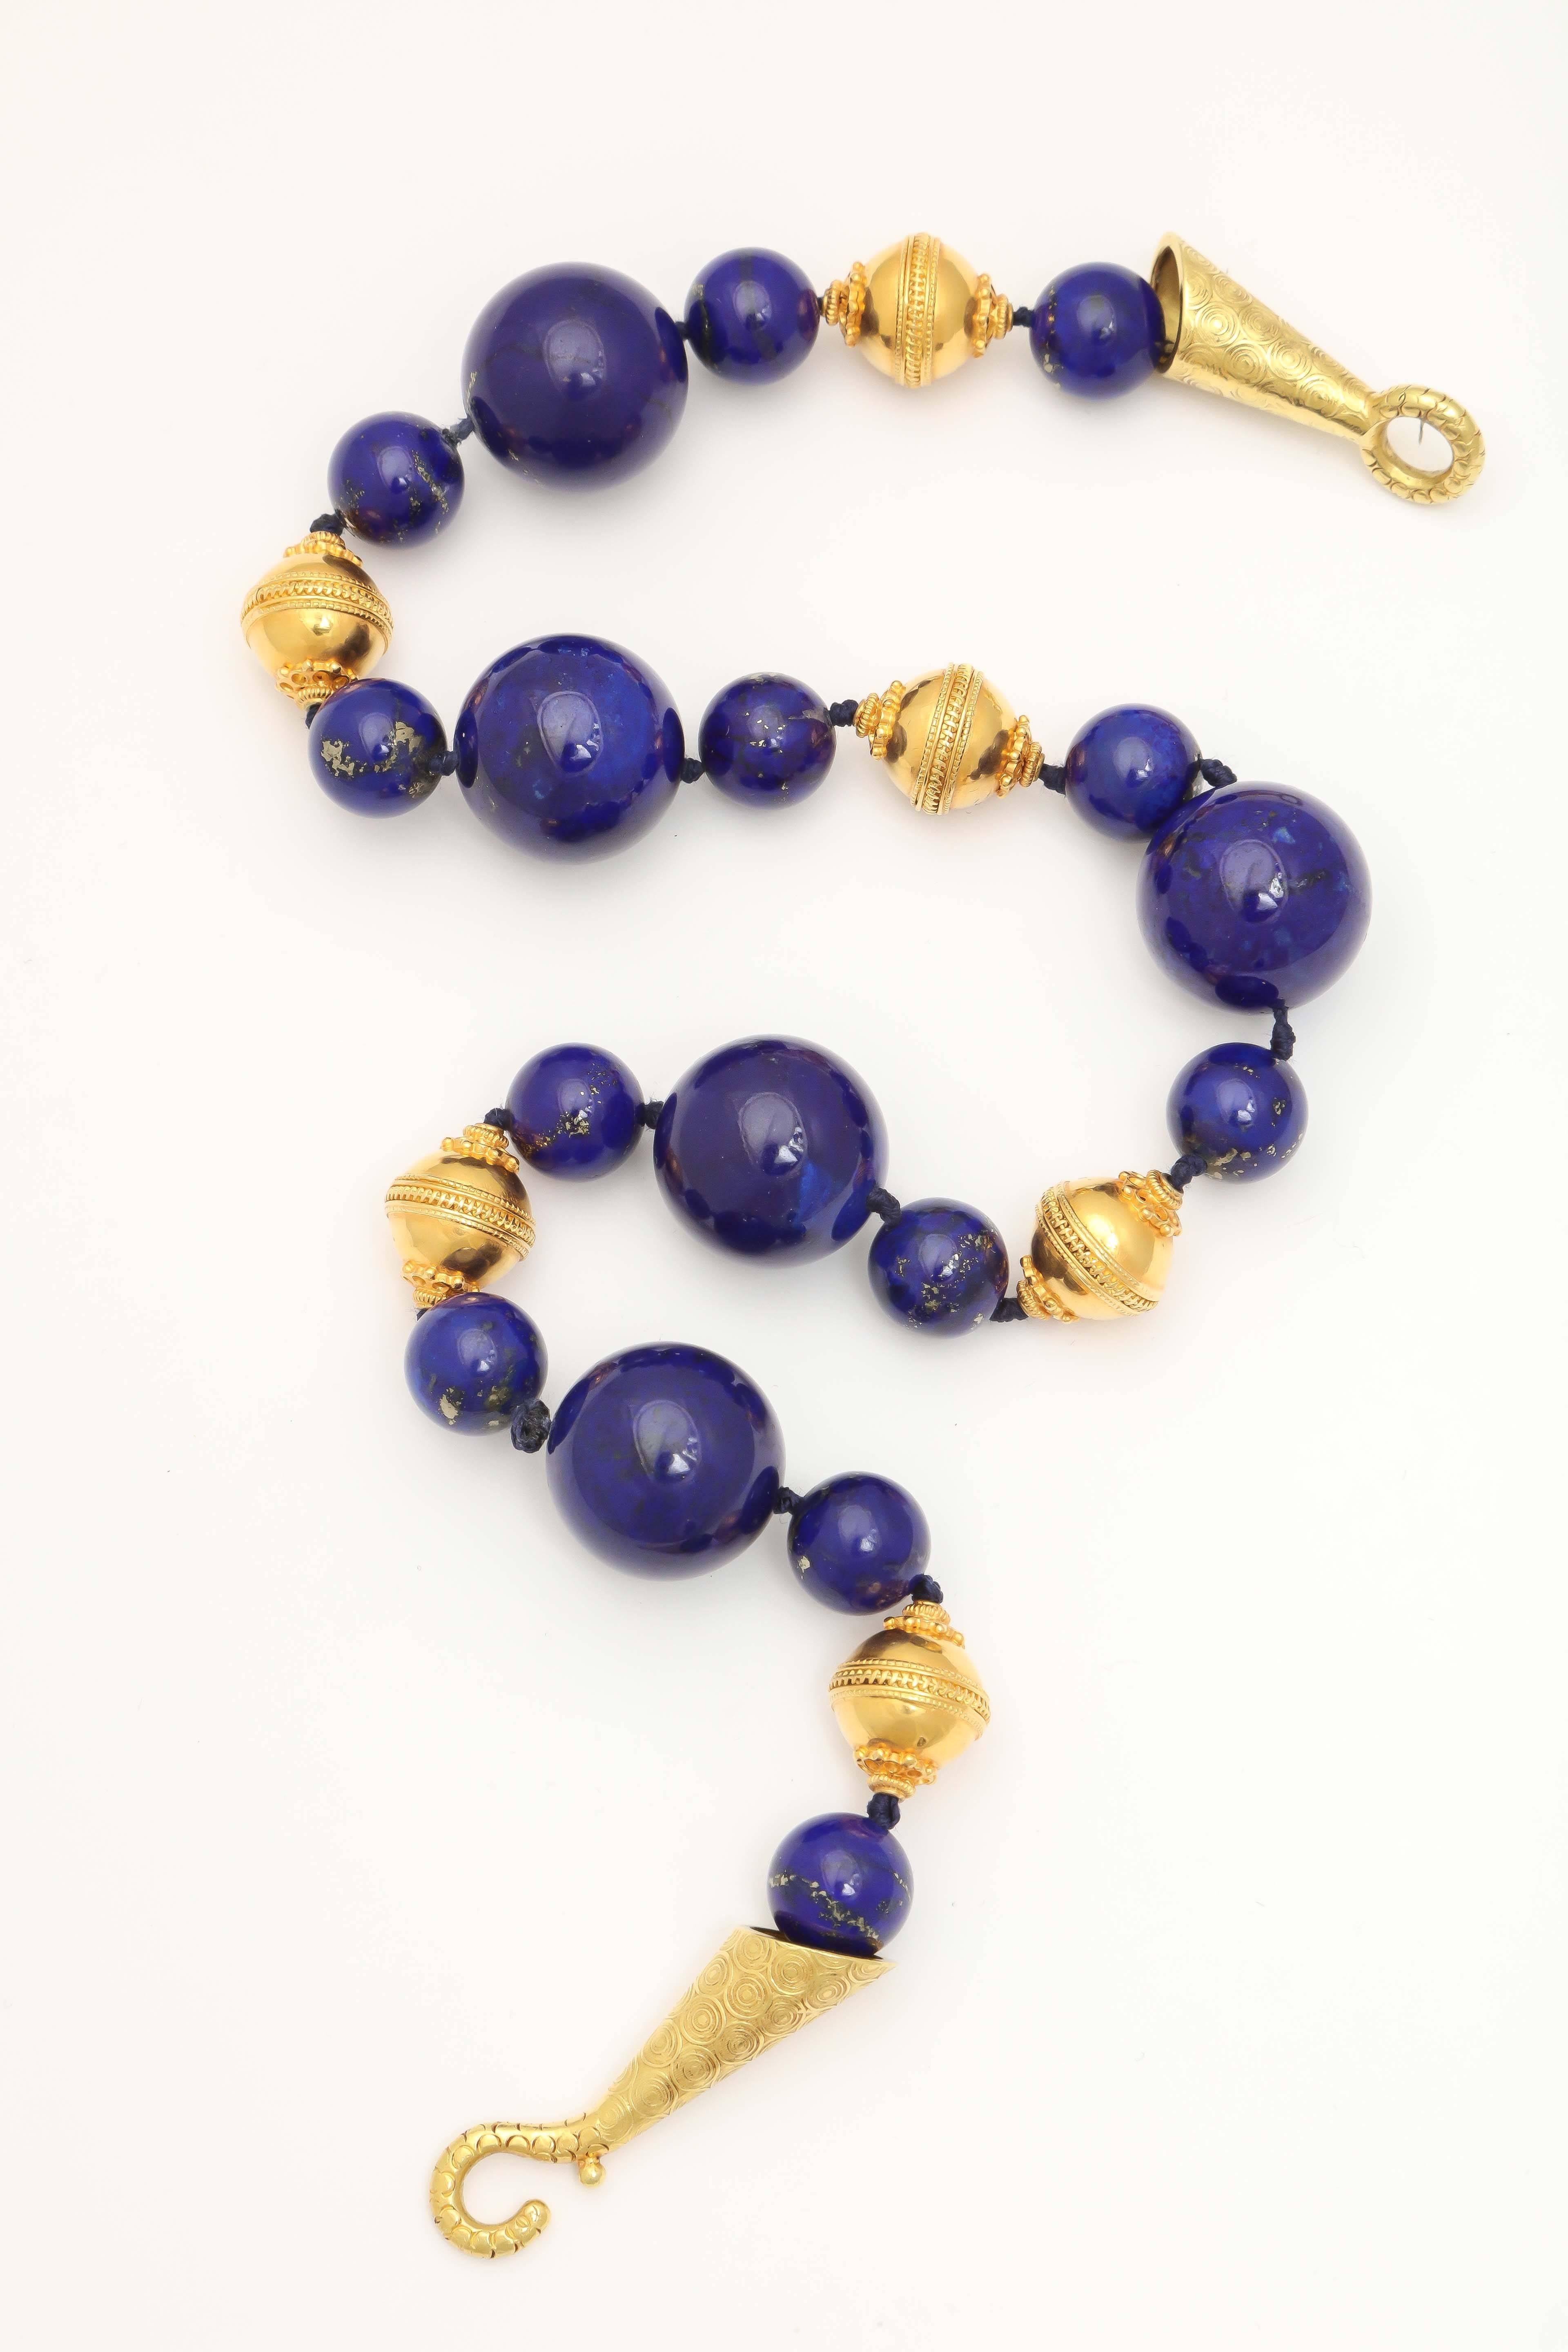 Sumptuous Russian Lapis Bead necklace with 6 Granulated 18t Gold Beads and 
fancy attenuated closure.  Ca 1960-l970.  